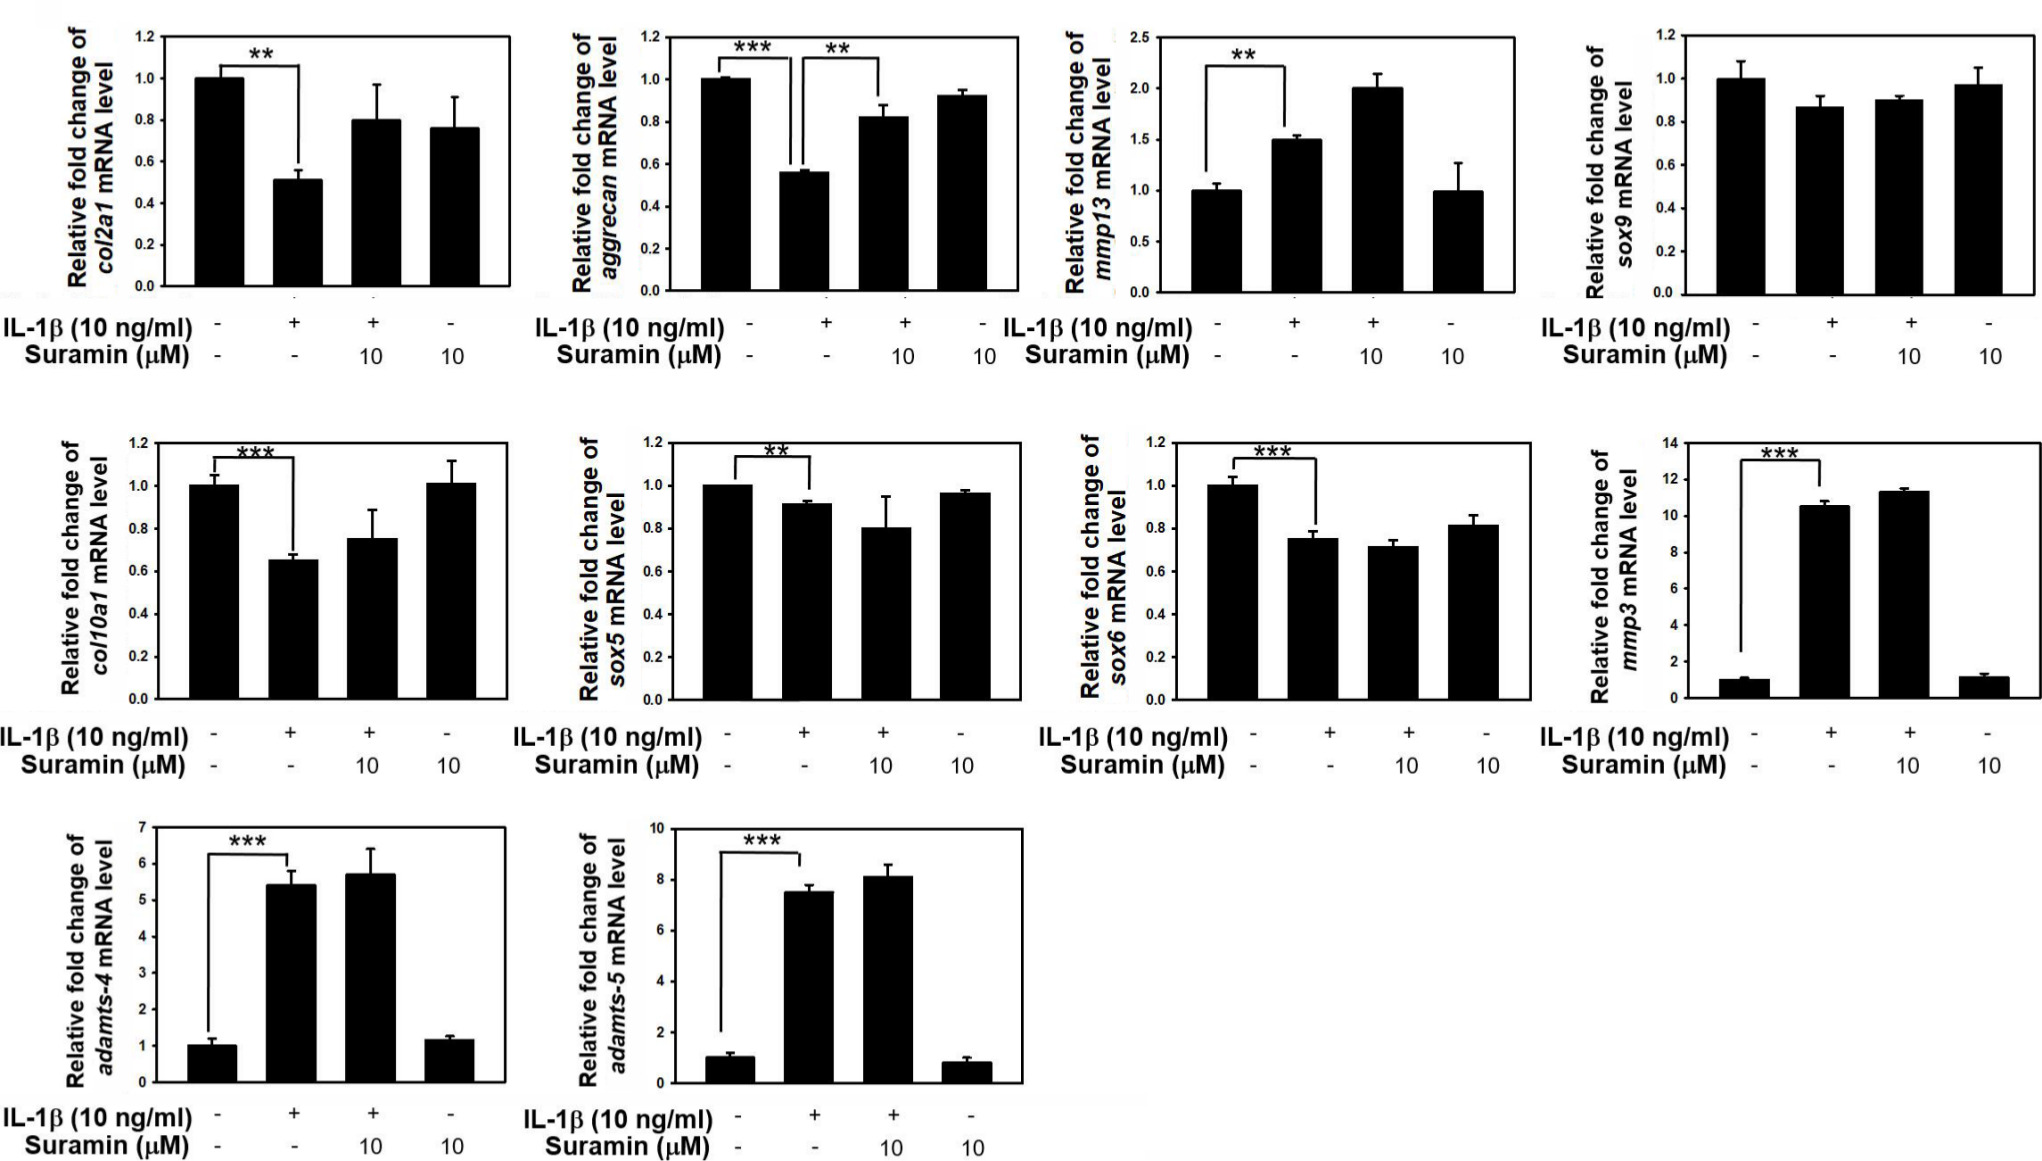 Fig. 2 
            Effect of suramin on interleukin (IL)-1β-induced anabolic and catabolic factors expression in nucleus pulposus (NP) cells. Sub-confluent NP cells were pretreated with 10 μM suramin for one hour, and then followed by treatment with 10 ng/ml IL-1β for 24 hours. Total RNA were extracted for real-time polymerase chain reaction analysis of collagen 2A (Col2a1), aggrecan, Col10a1, SRY-Box Transcription Factor 5 (Sox5), Sox6, Sox9, a disintegrin and metalloproteinase with thrombospondin motifs (ADAMTS)-4, ADAMTS-5, matrix metalloproteinase (MMP)-13, and MMP-3 messenger RNA (mRNA) expression. Data represent means and standard deviations (n = 3 to 5) (**p < 0.01, ***p < 0.001 compared with untreated control or IL-1β treated group).
          